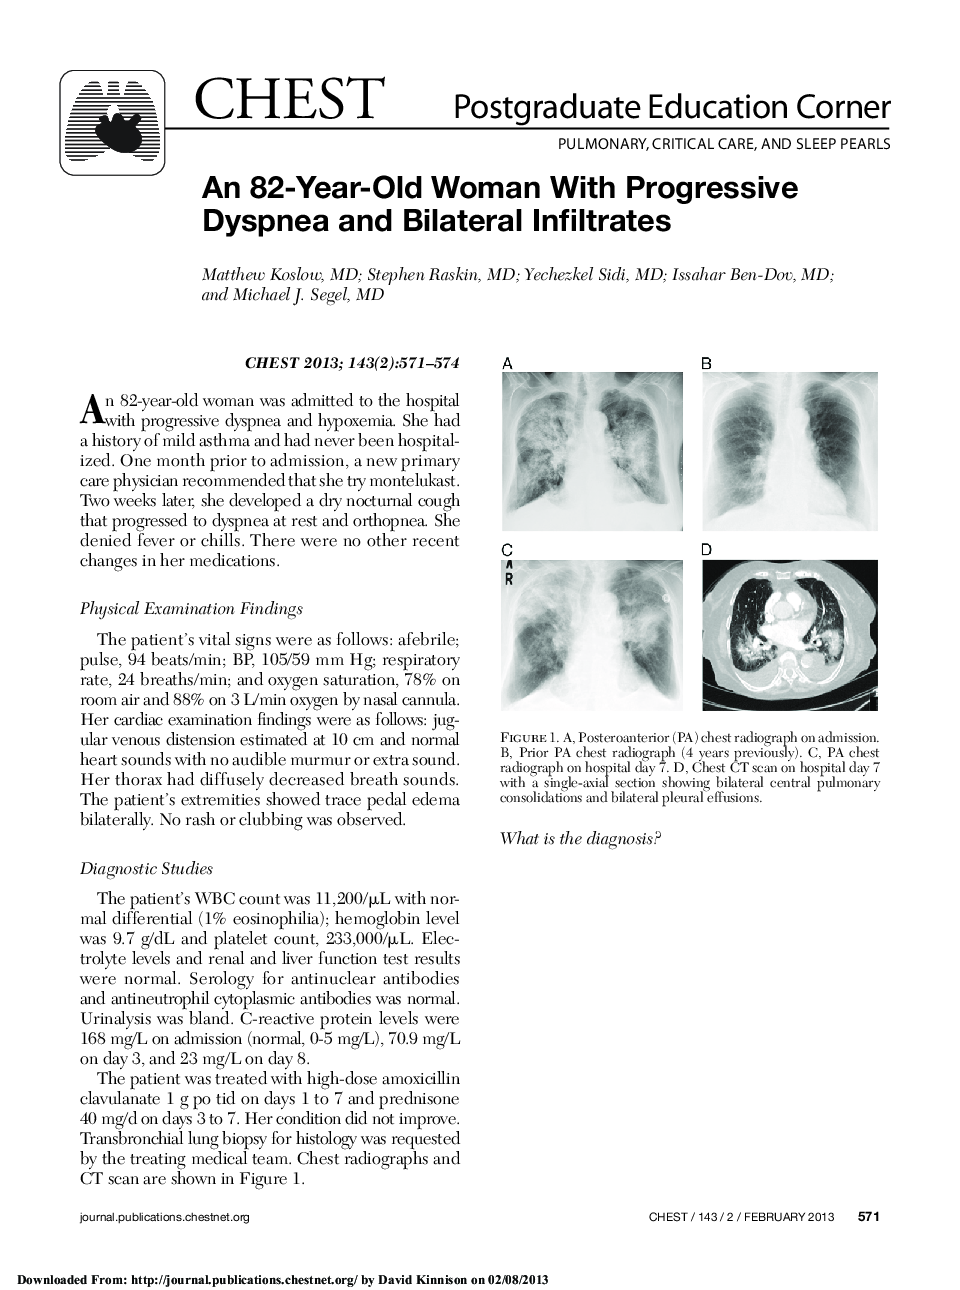 An 82-Year-Old Woman With Progressive Dyspnea and Bilateral Infiltrates